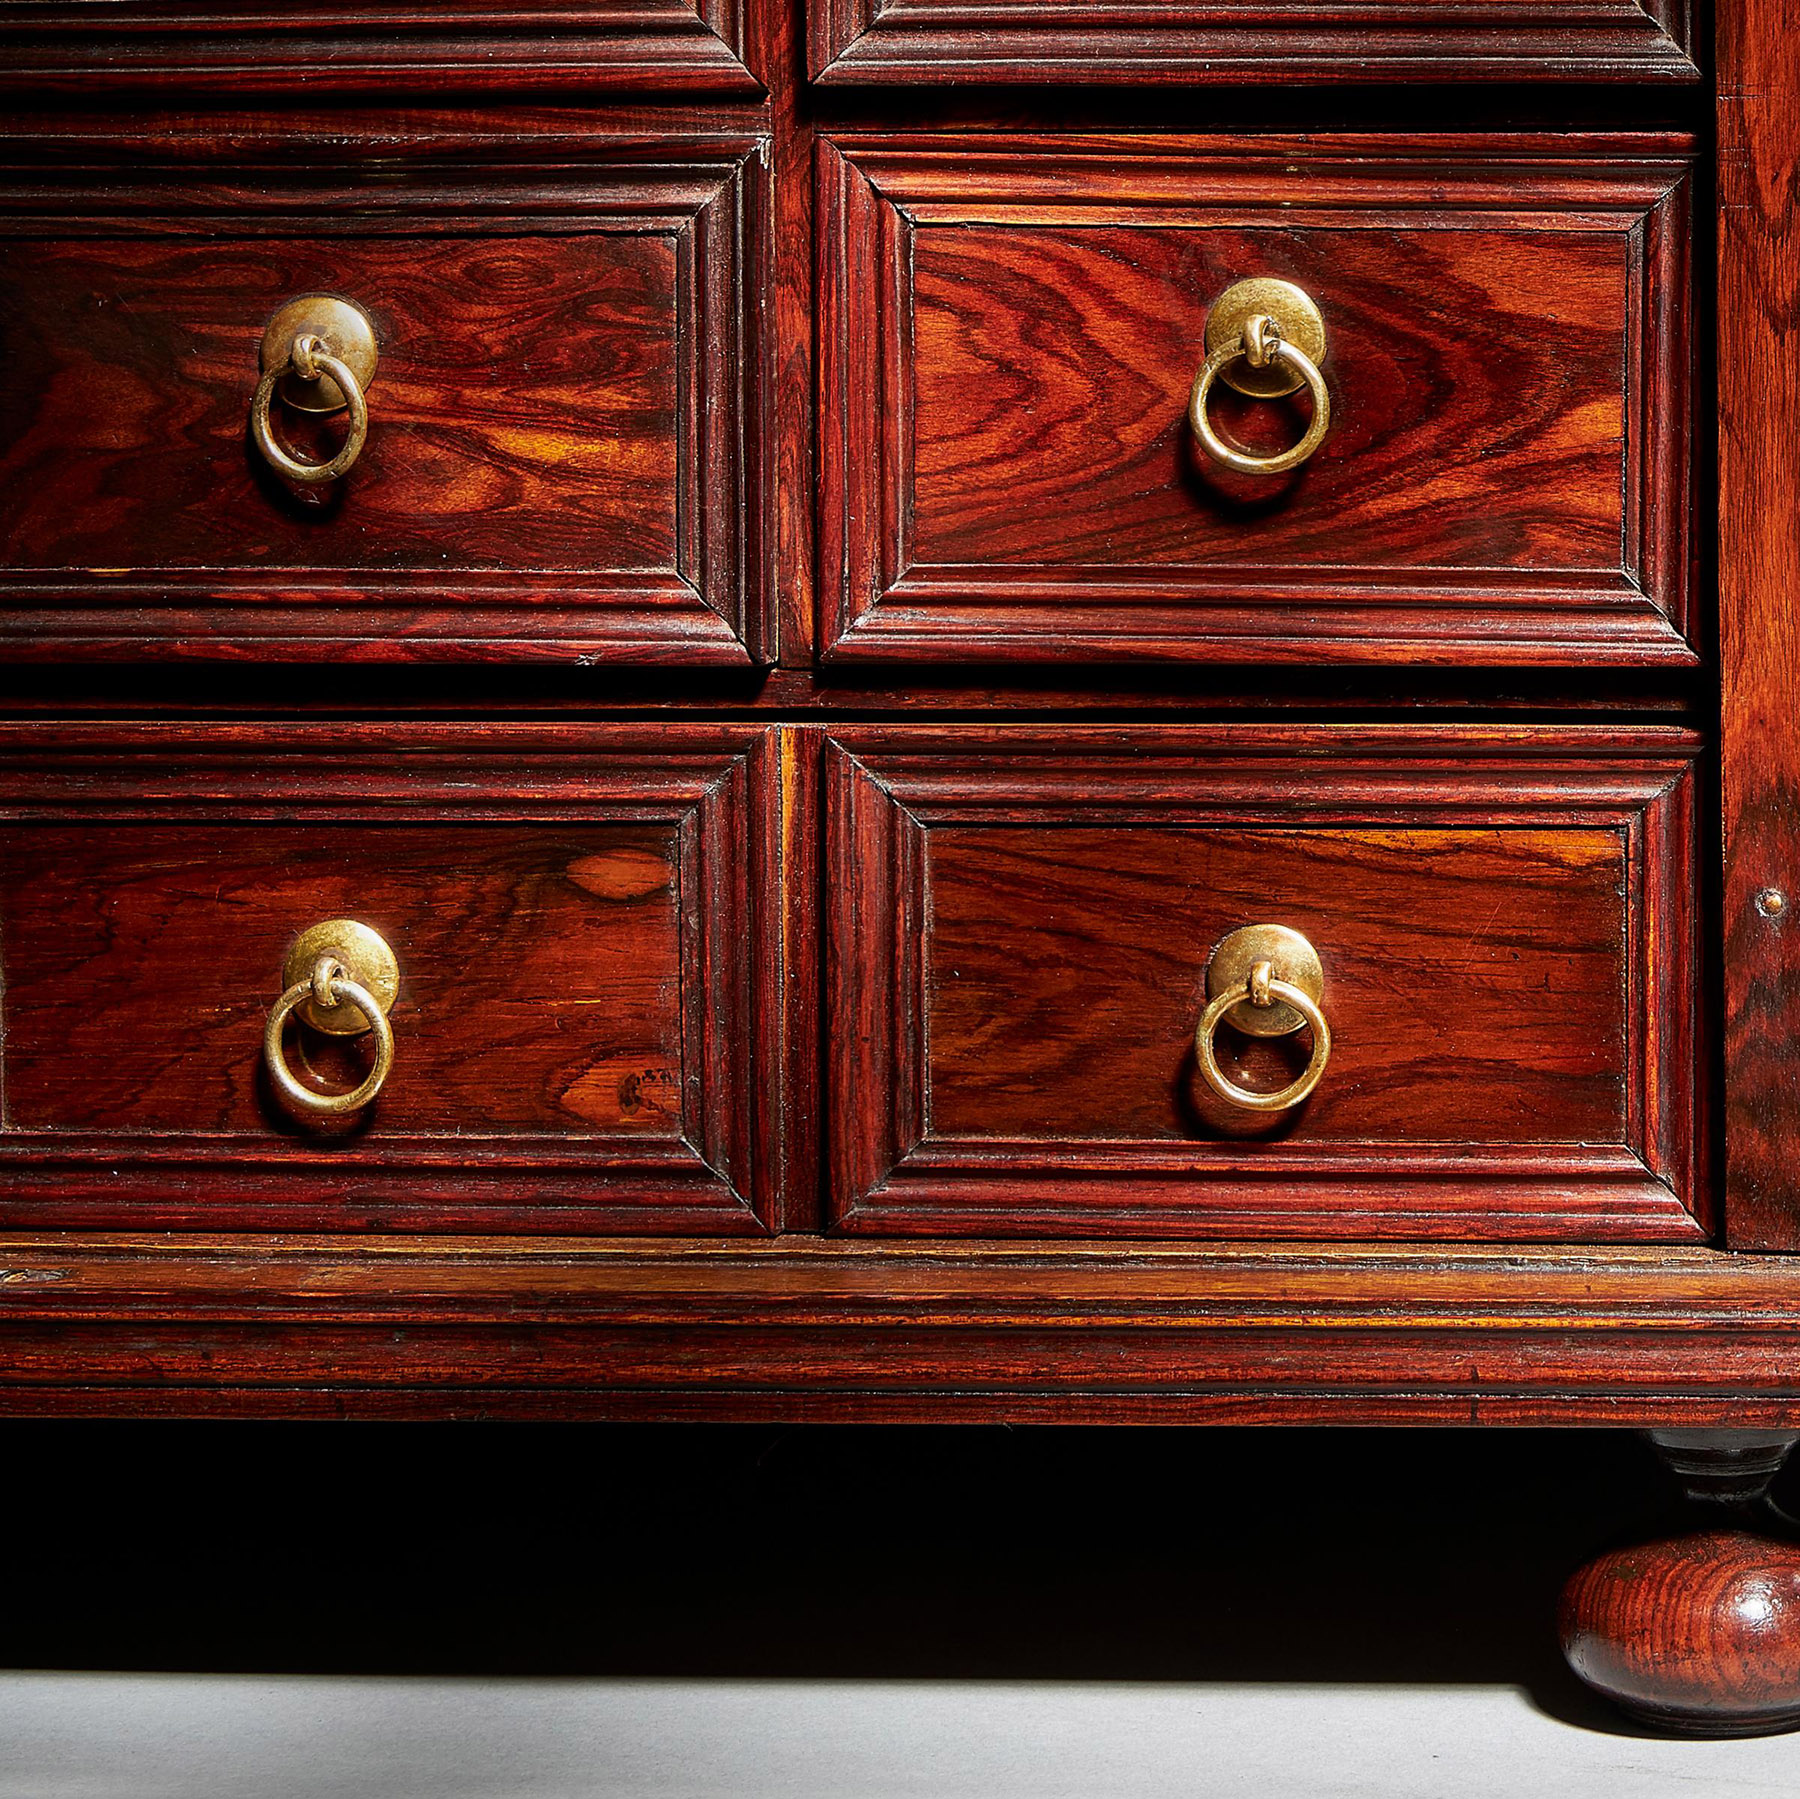 Extremely Rare and Fine Miniature Kingwood Table Cabinet from the Reign of Charles II 17